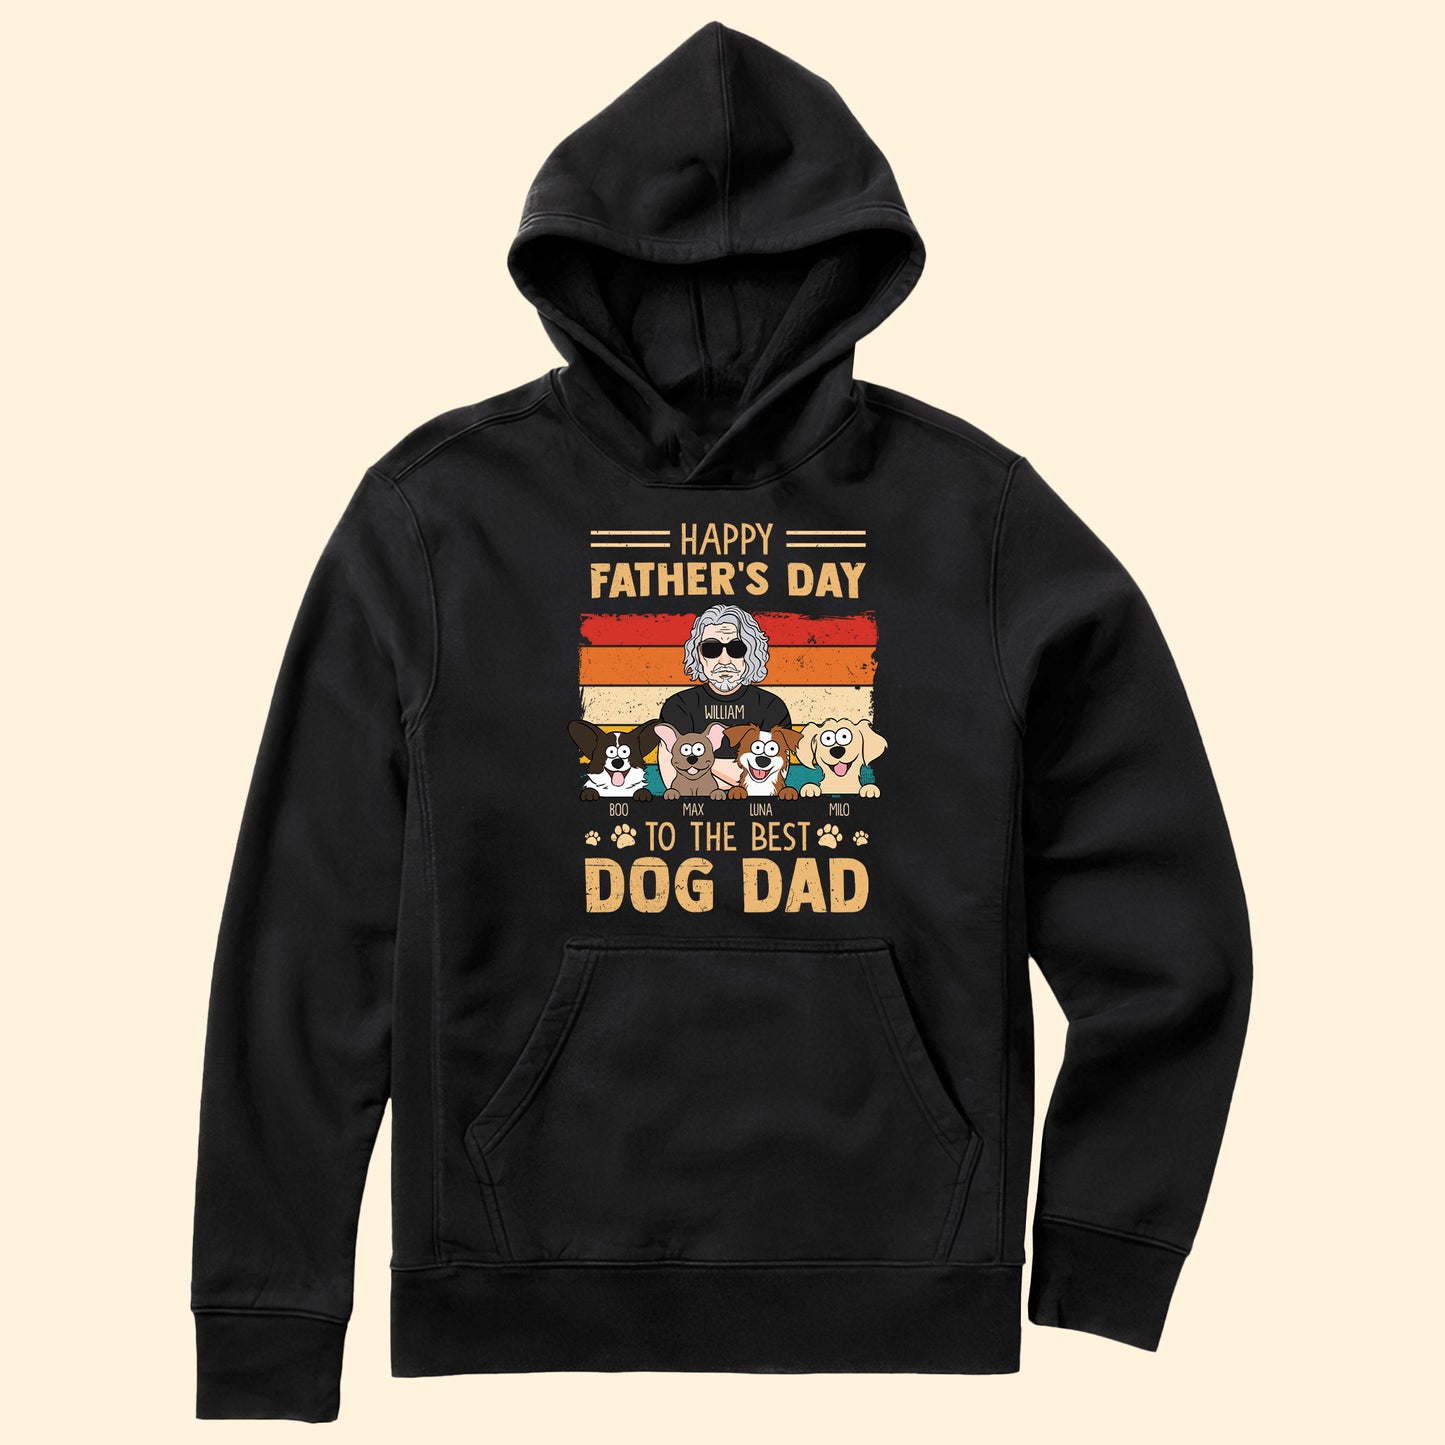 Happy Father's Day To The Best Dog Dad - Personalized Shirt